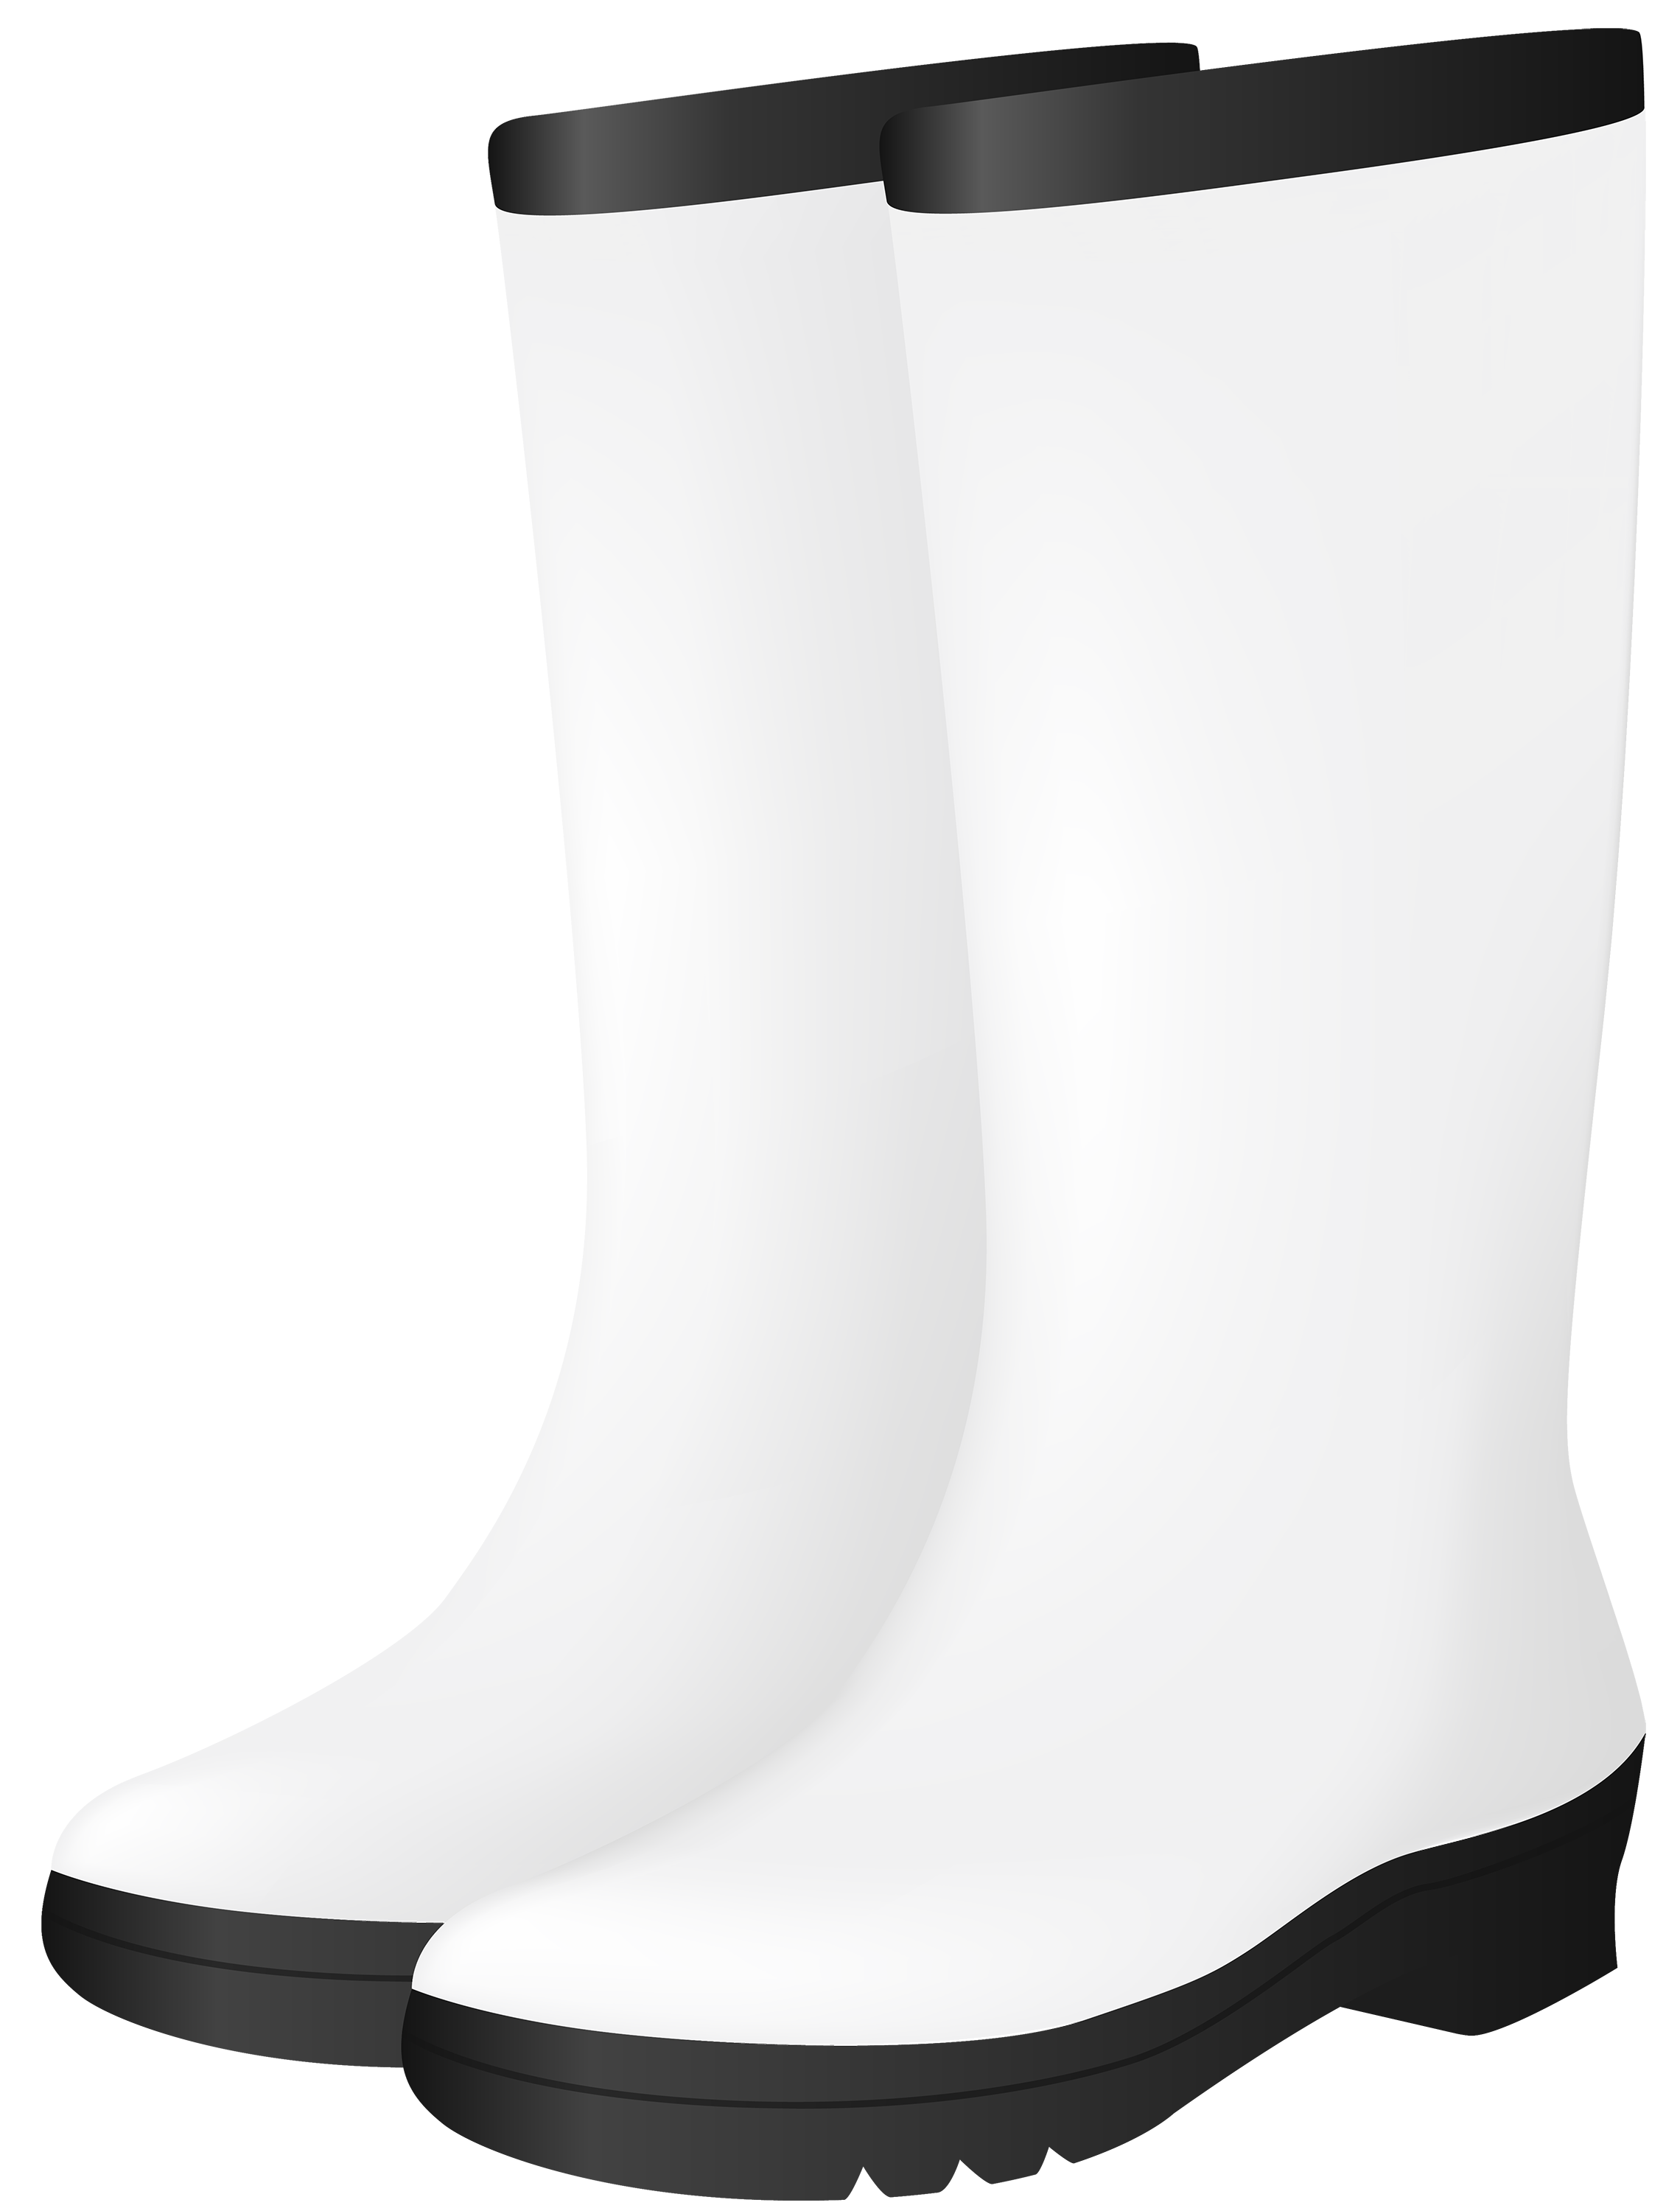 rubber boots white